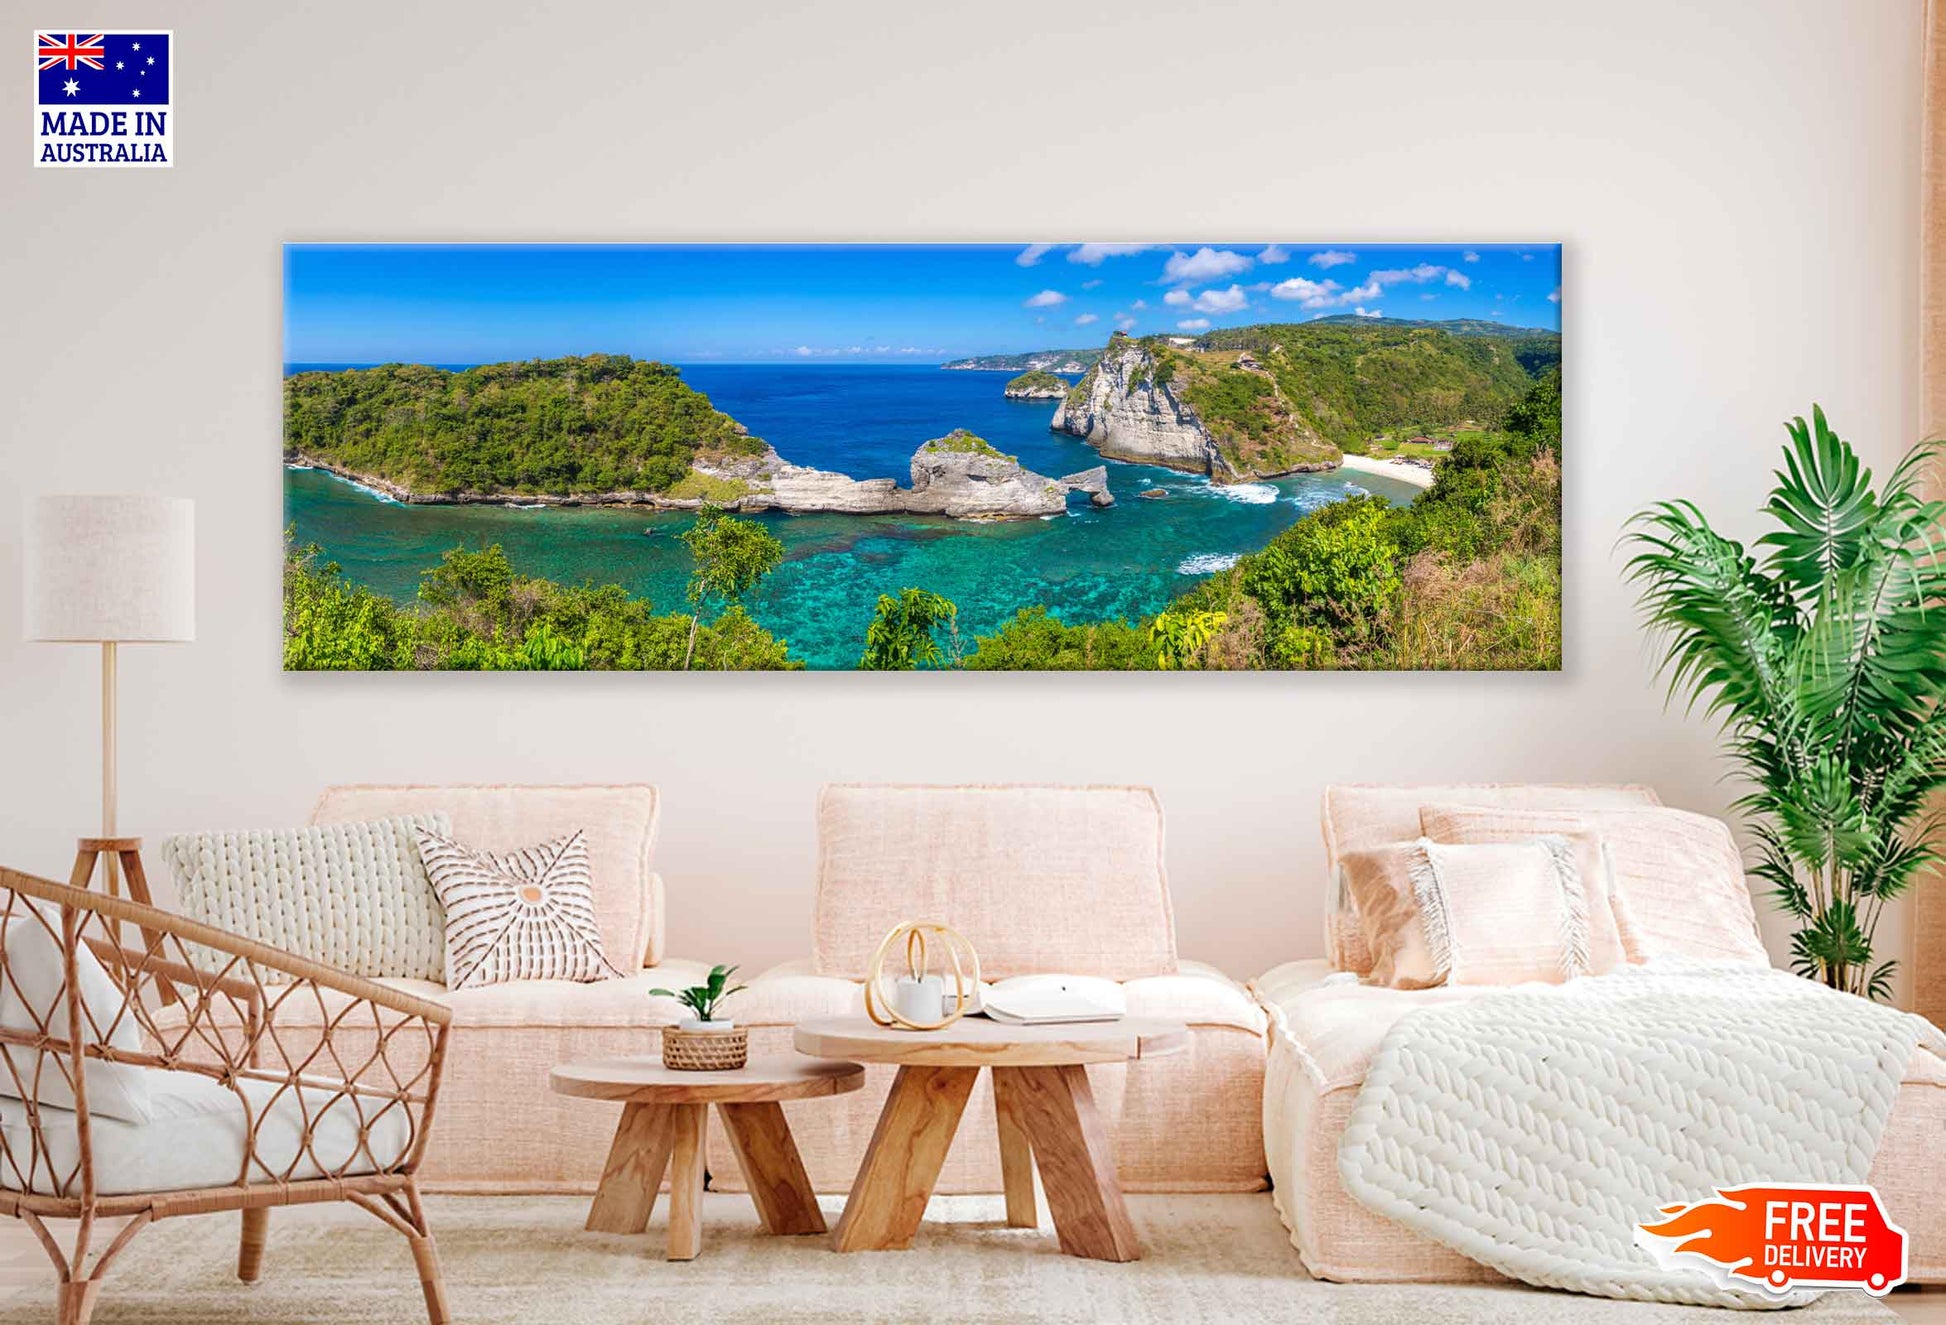 Panoramic Canvas Atuh Beach View From Top High Quality 100% Australian Made Wall Canvas Print Ready to Hang